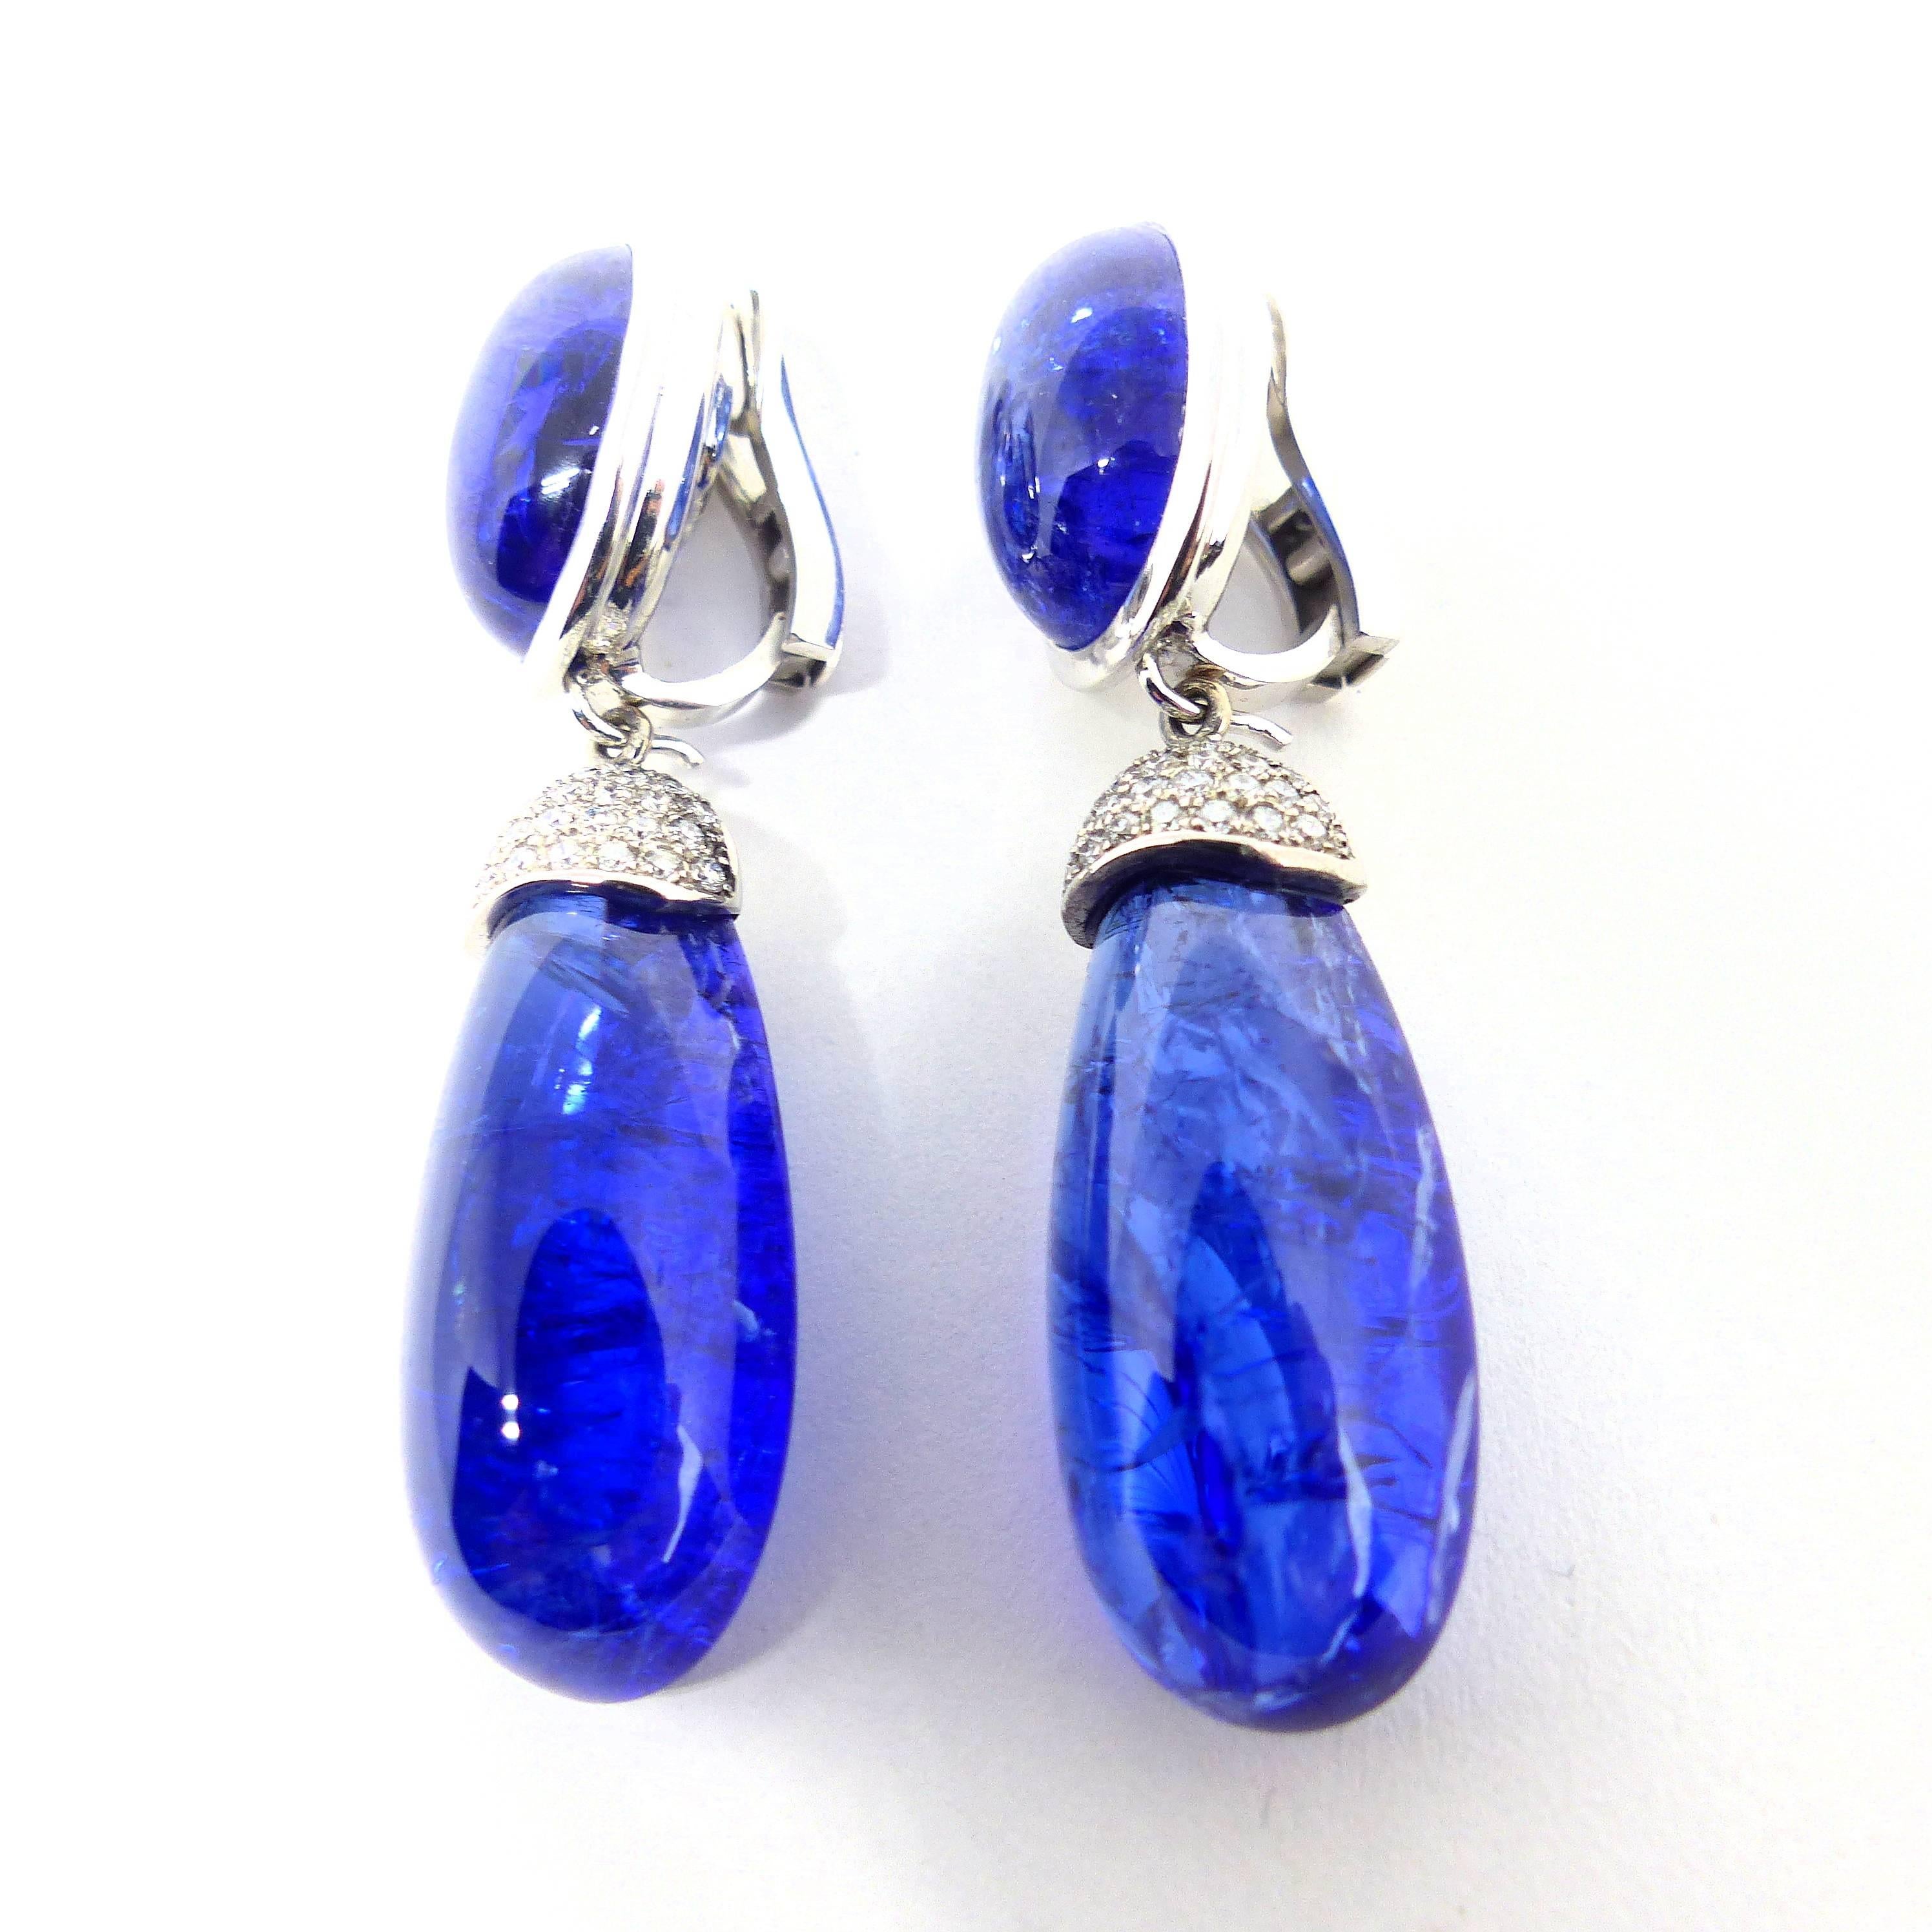 Pear Cut Earrings in White Gold with 4 Tanzanite Cabouchons and Diamonds. For Sale